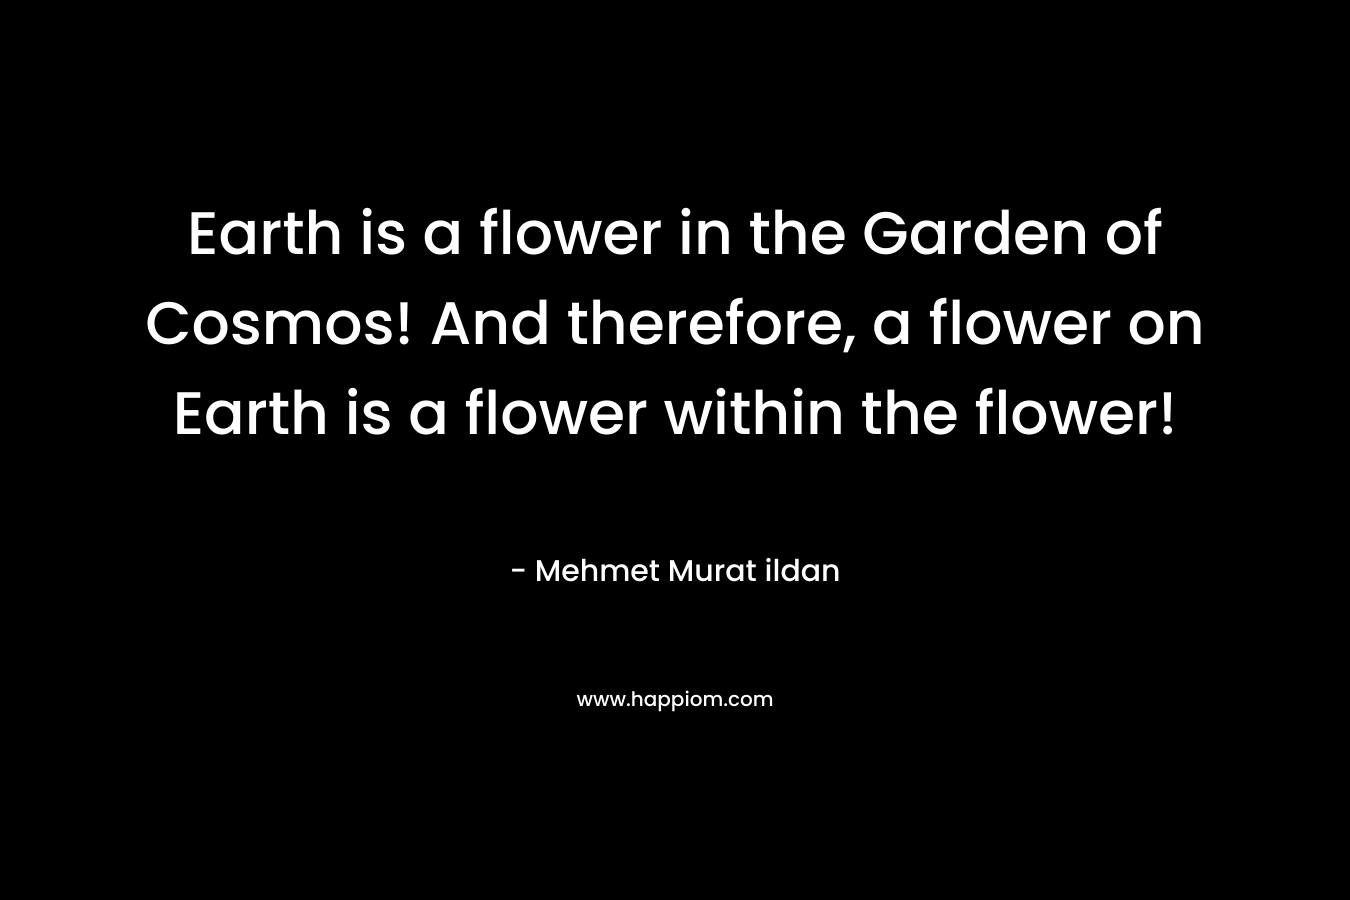 Earth is a flower in the Garden of Cosmos! And therefore, a flower on Earth is a flower within the flower!